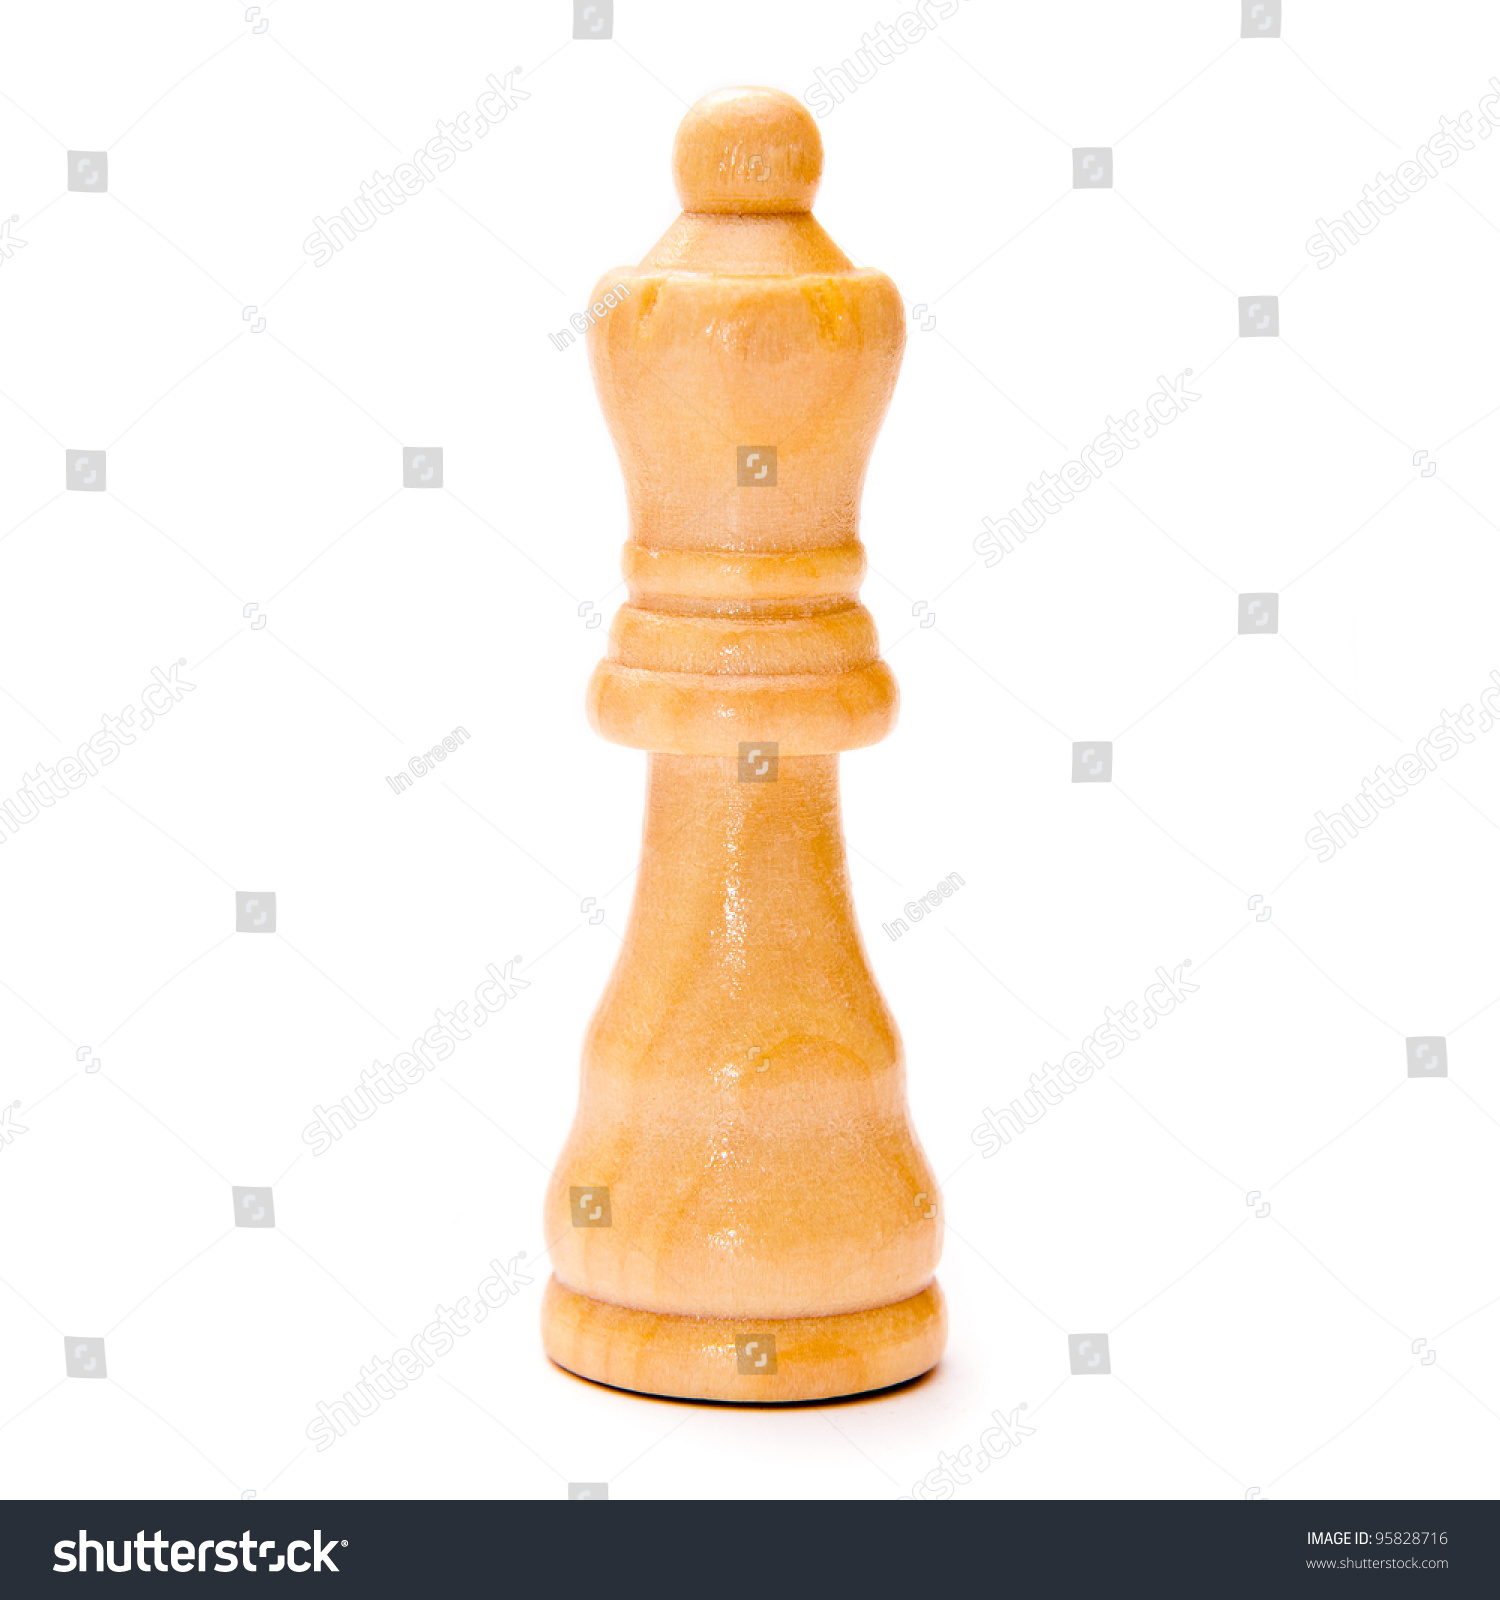 White Queen Chess Piece On A White Background Stock Photo 95828716 ...